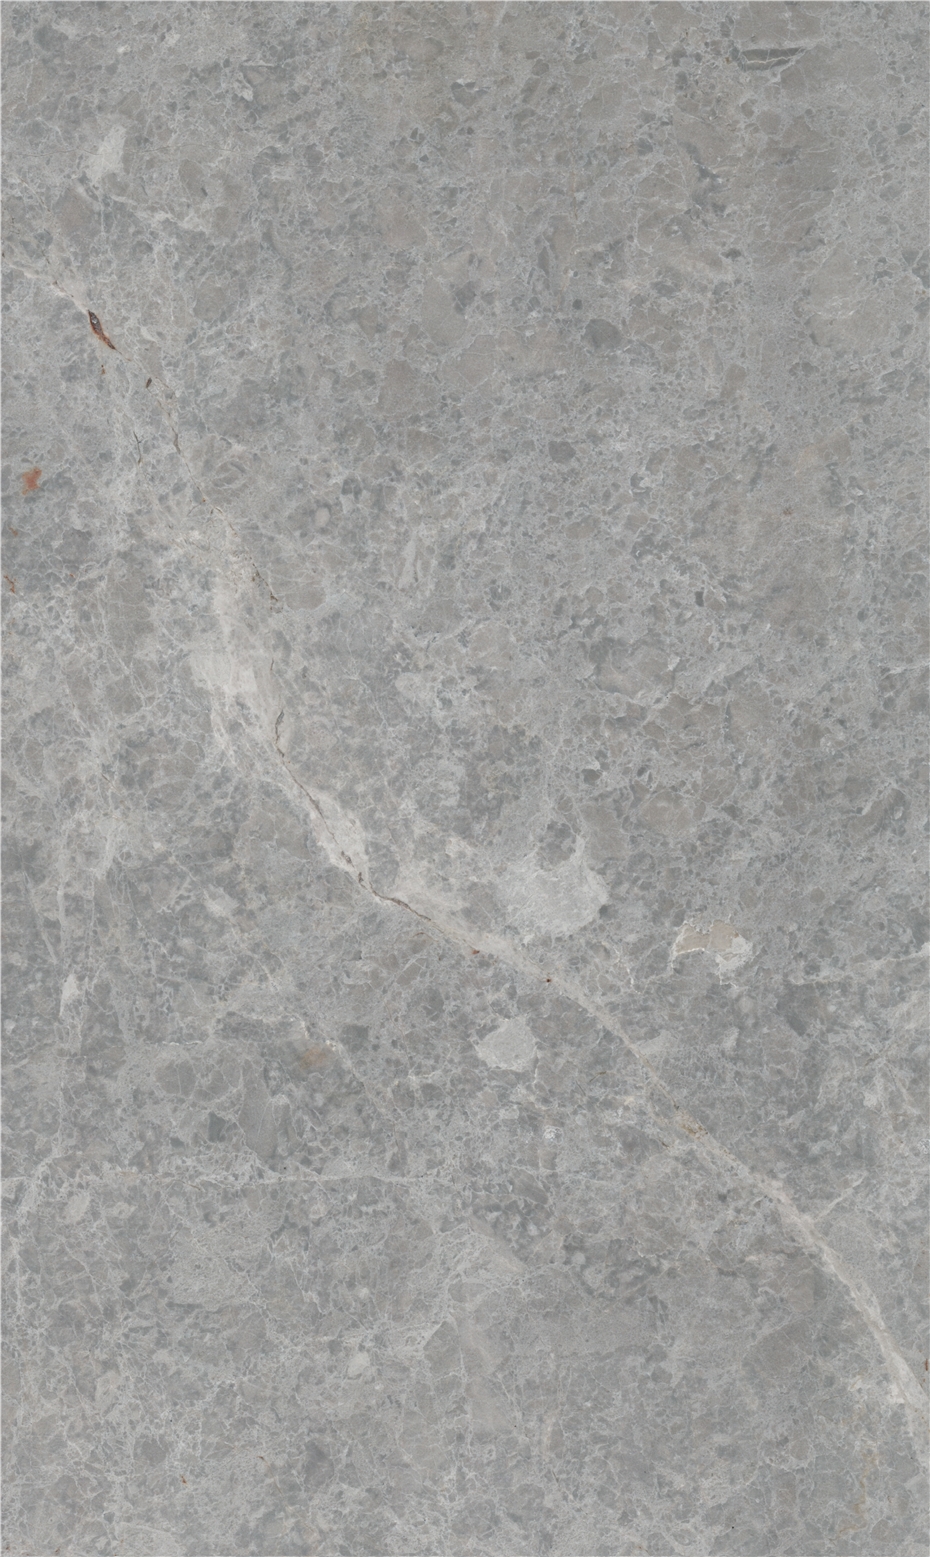 All Kinds Of Marble Natural Stone Page 11